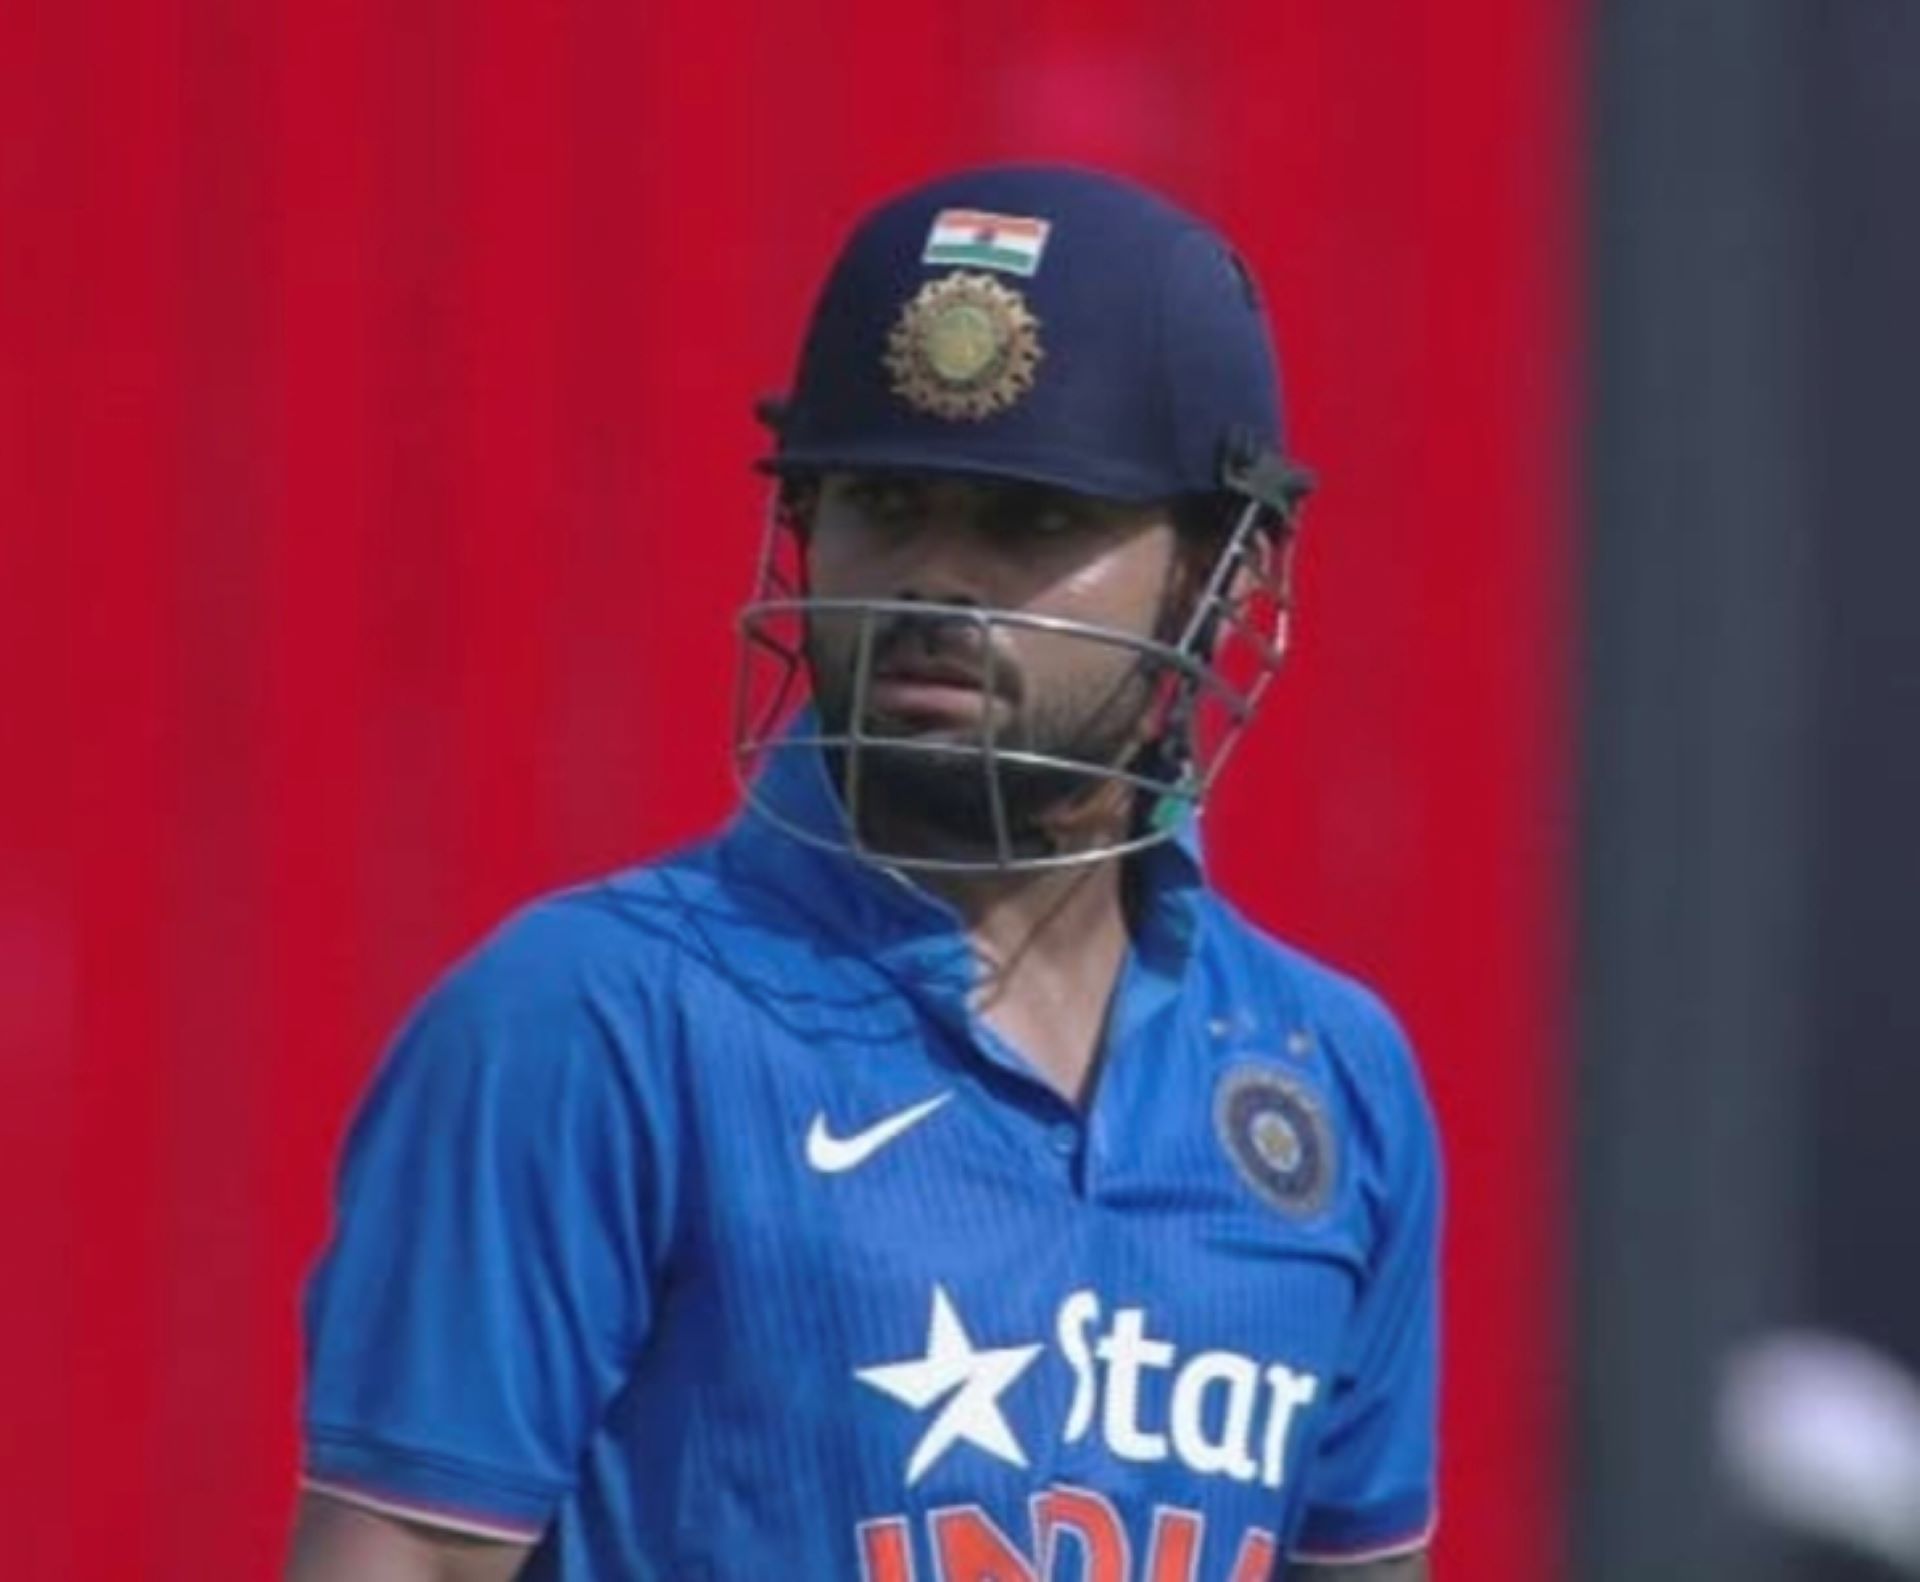 Kohli gave a death stare to the Bangladesh Team after witnessing their wild celebrations post his dismissal. [Pic Credit - Hotstar]